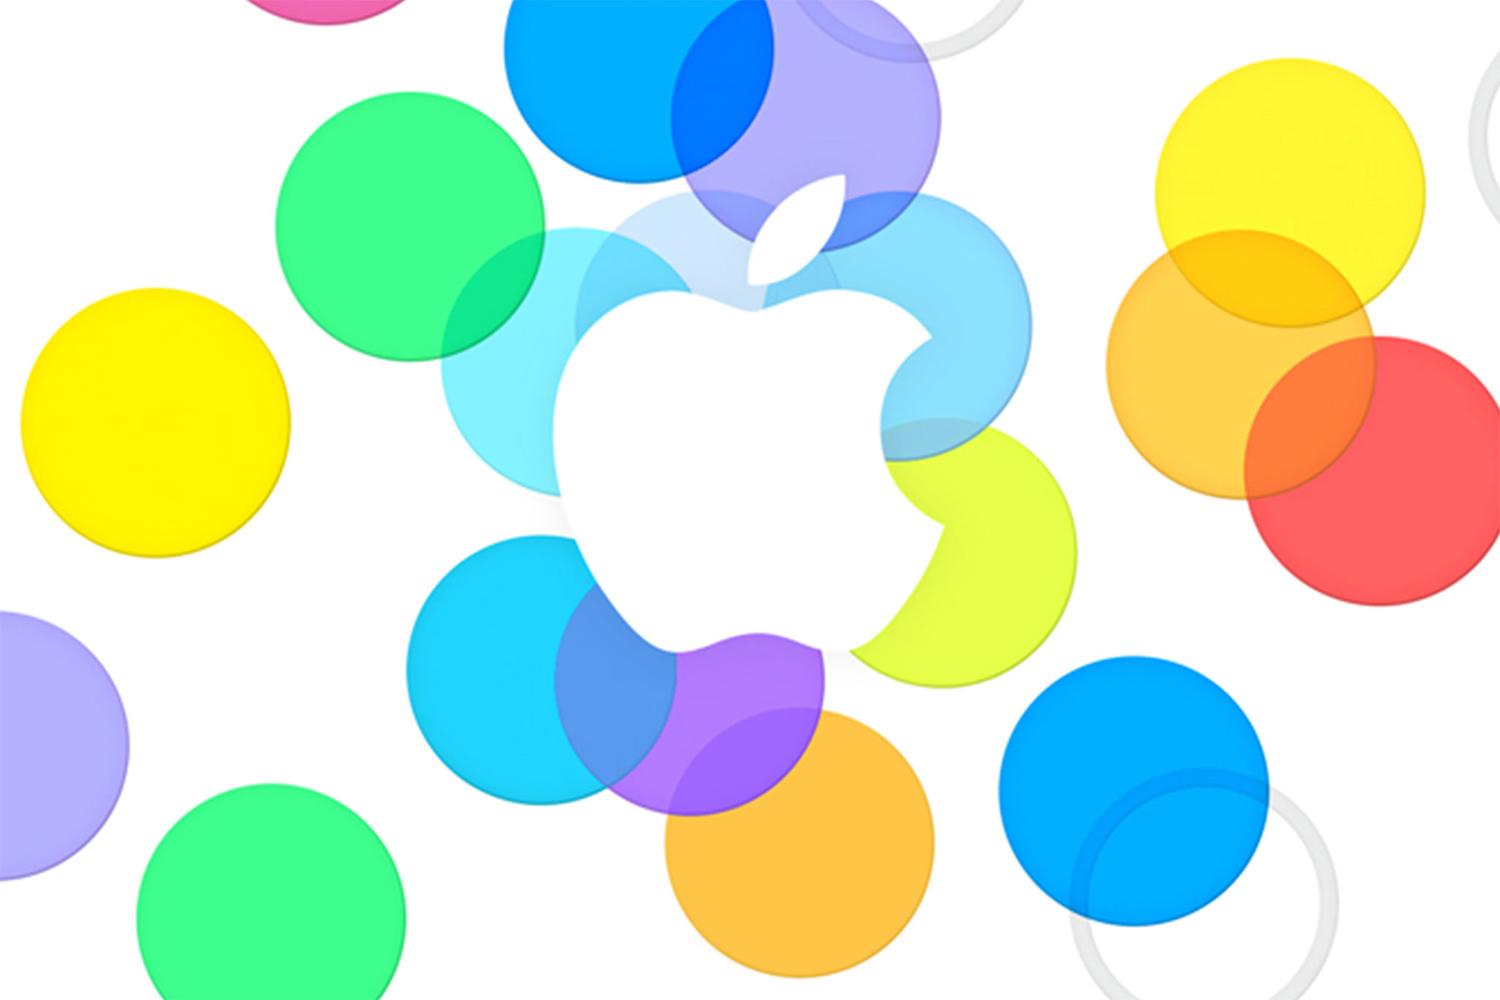 apple sep 10 iphone 5s 5c - Apple might Abandon Game Center in iOS 8